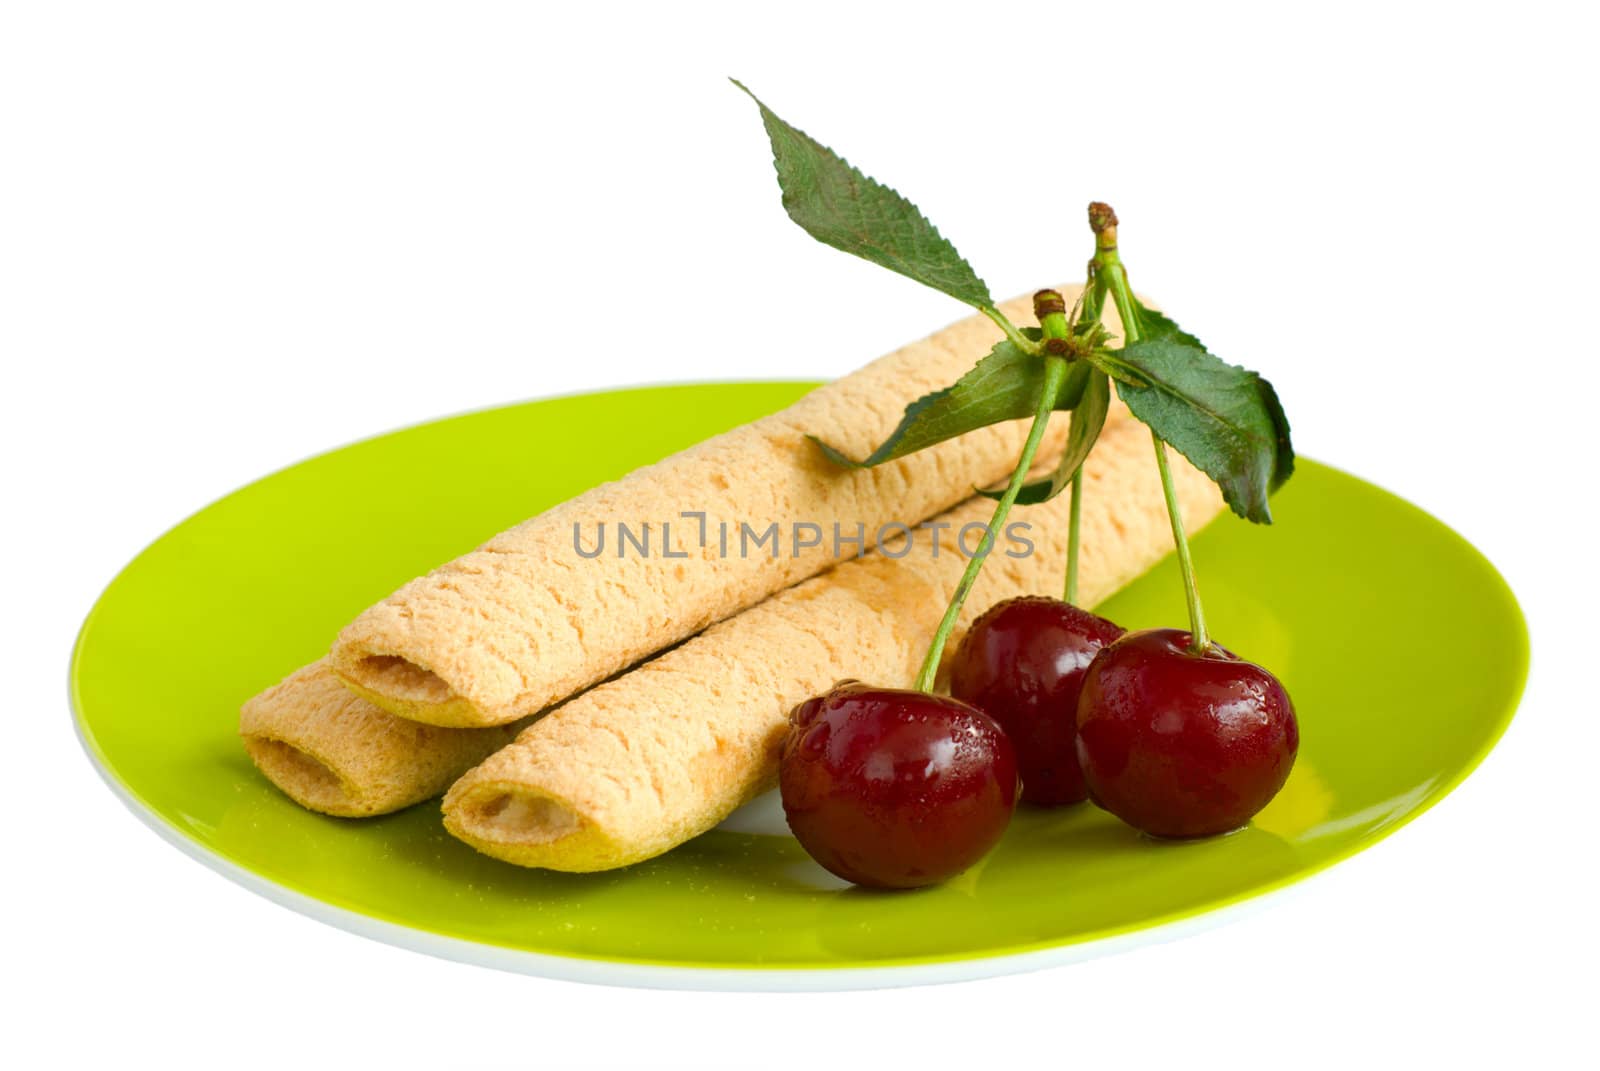 Biscuits and cherries on a green plate